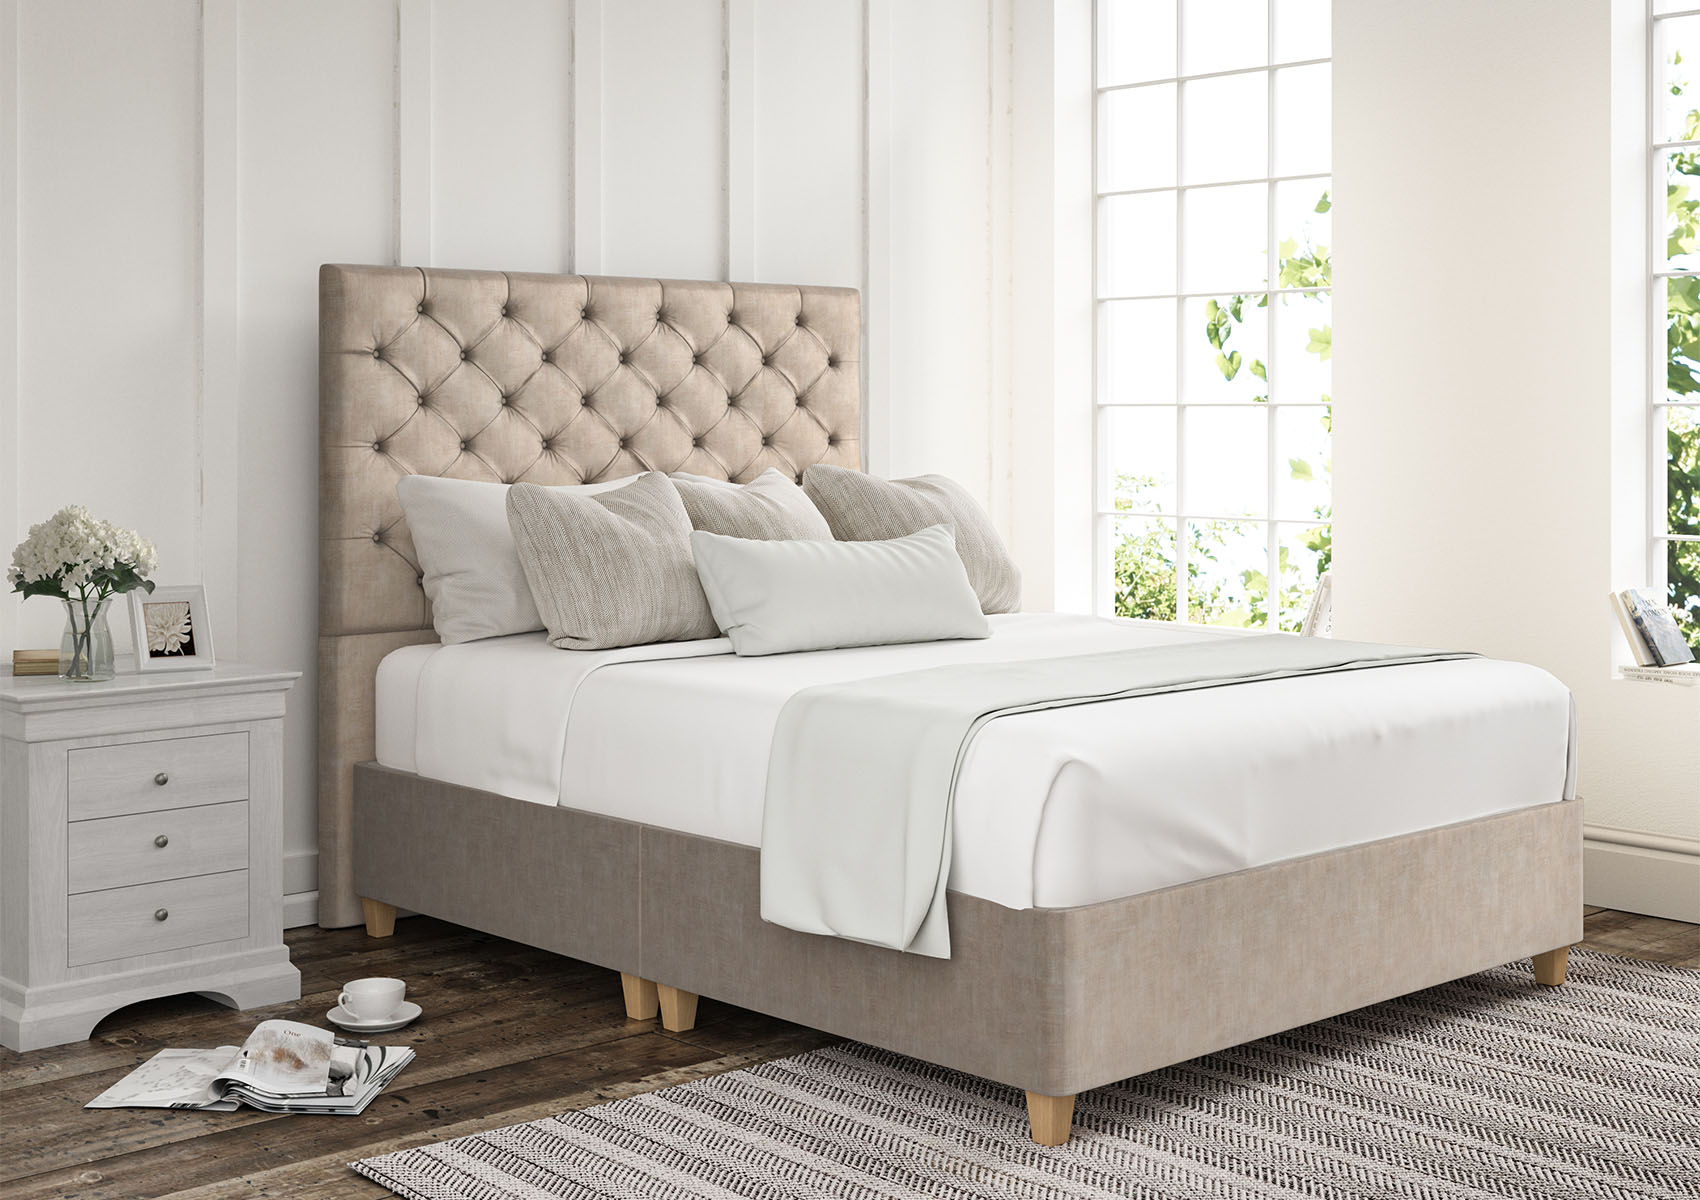 View Chesterfield Carina Parchment Upholstered Single Divan Bed Time4Sleep information